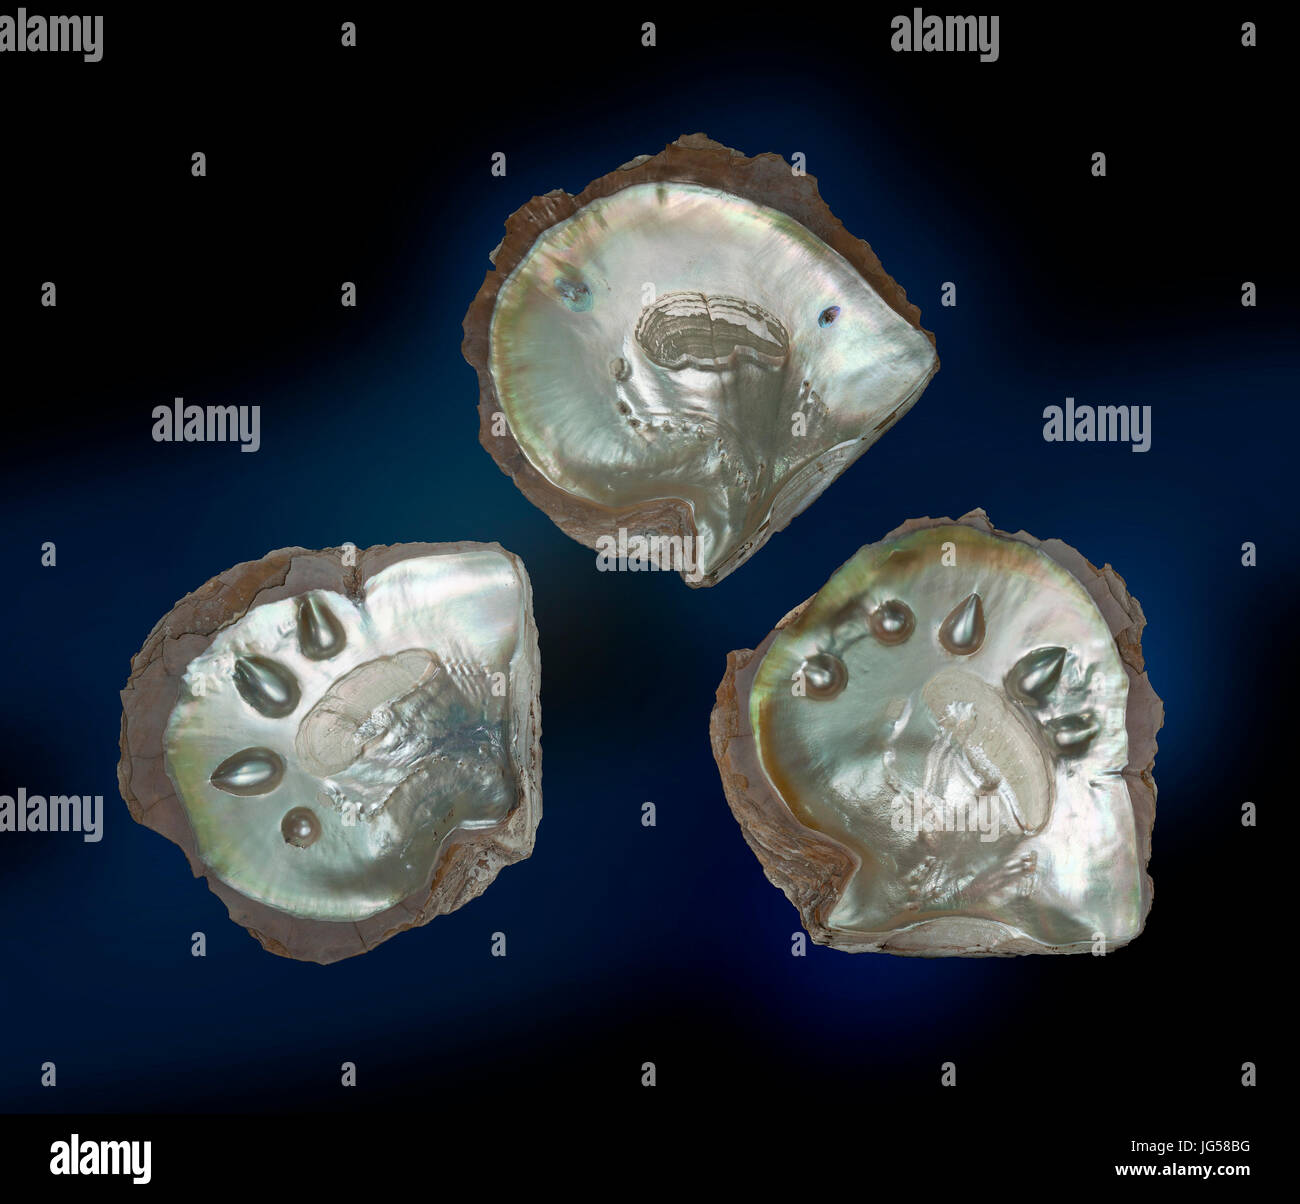 Pearl oysters with artificial pearl implants Stock Photo